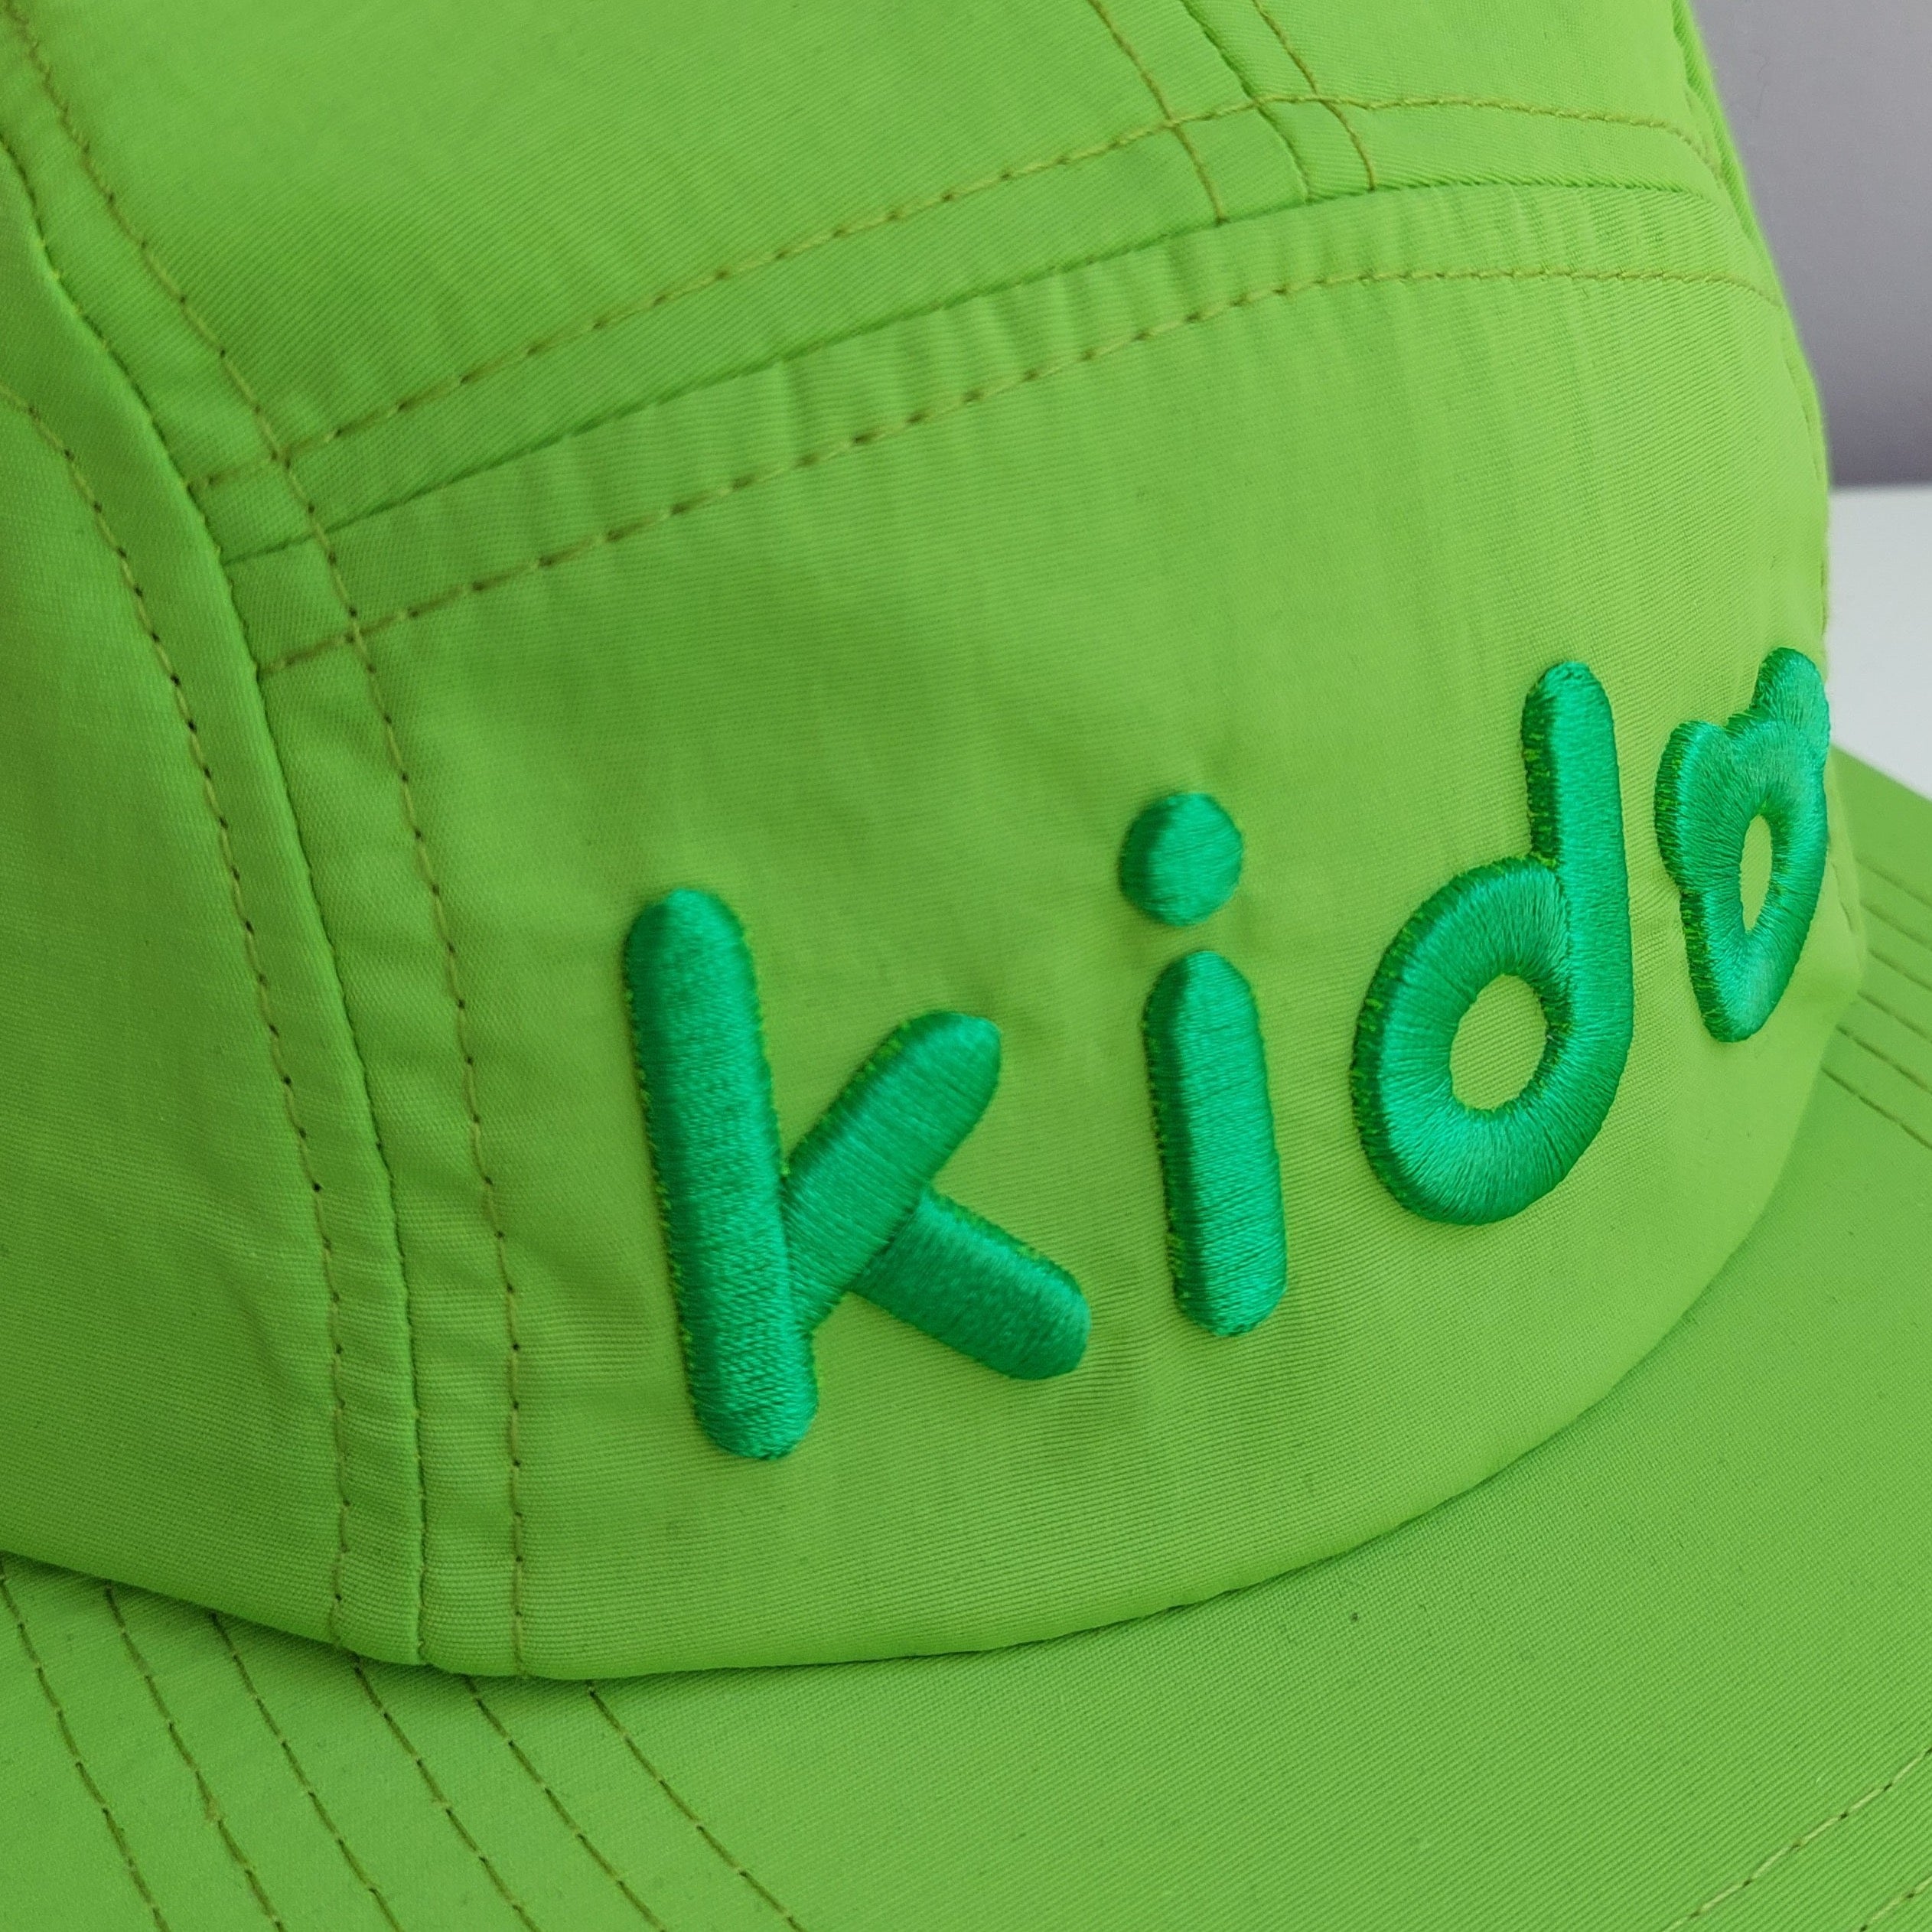 A close up of a bright green 5 panel cap turned at a 45 degree angle sits on a white surface with a light purple background. The Kido logo is visible across the front in darker green embroidery.